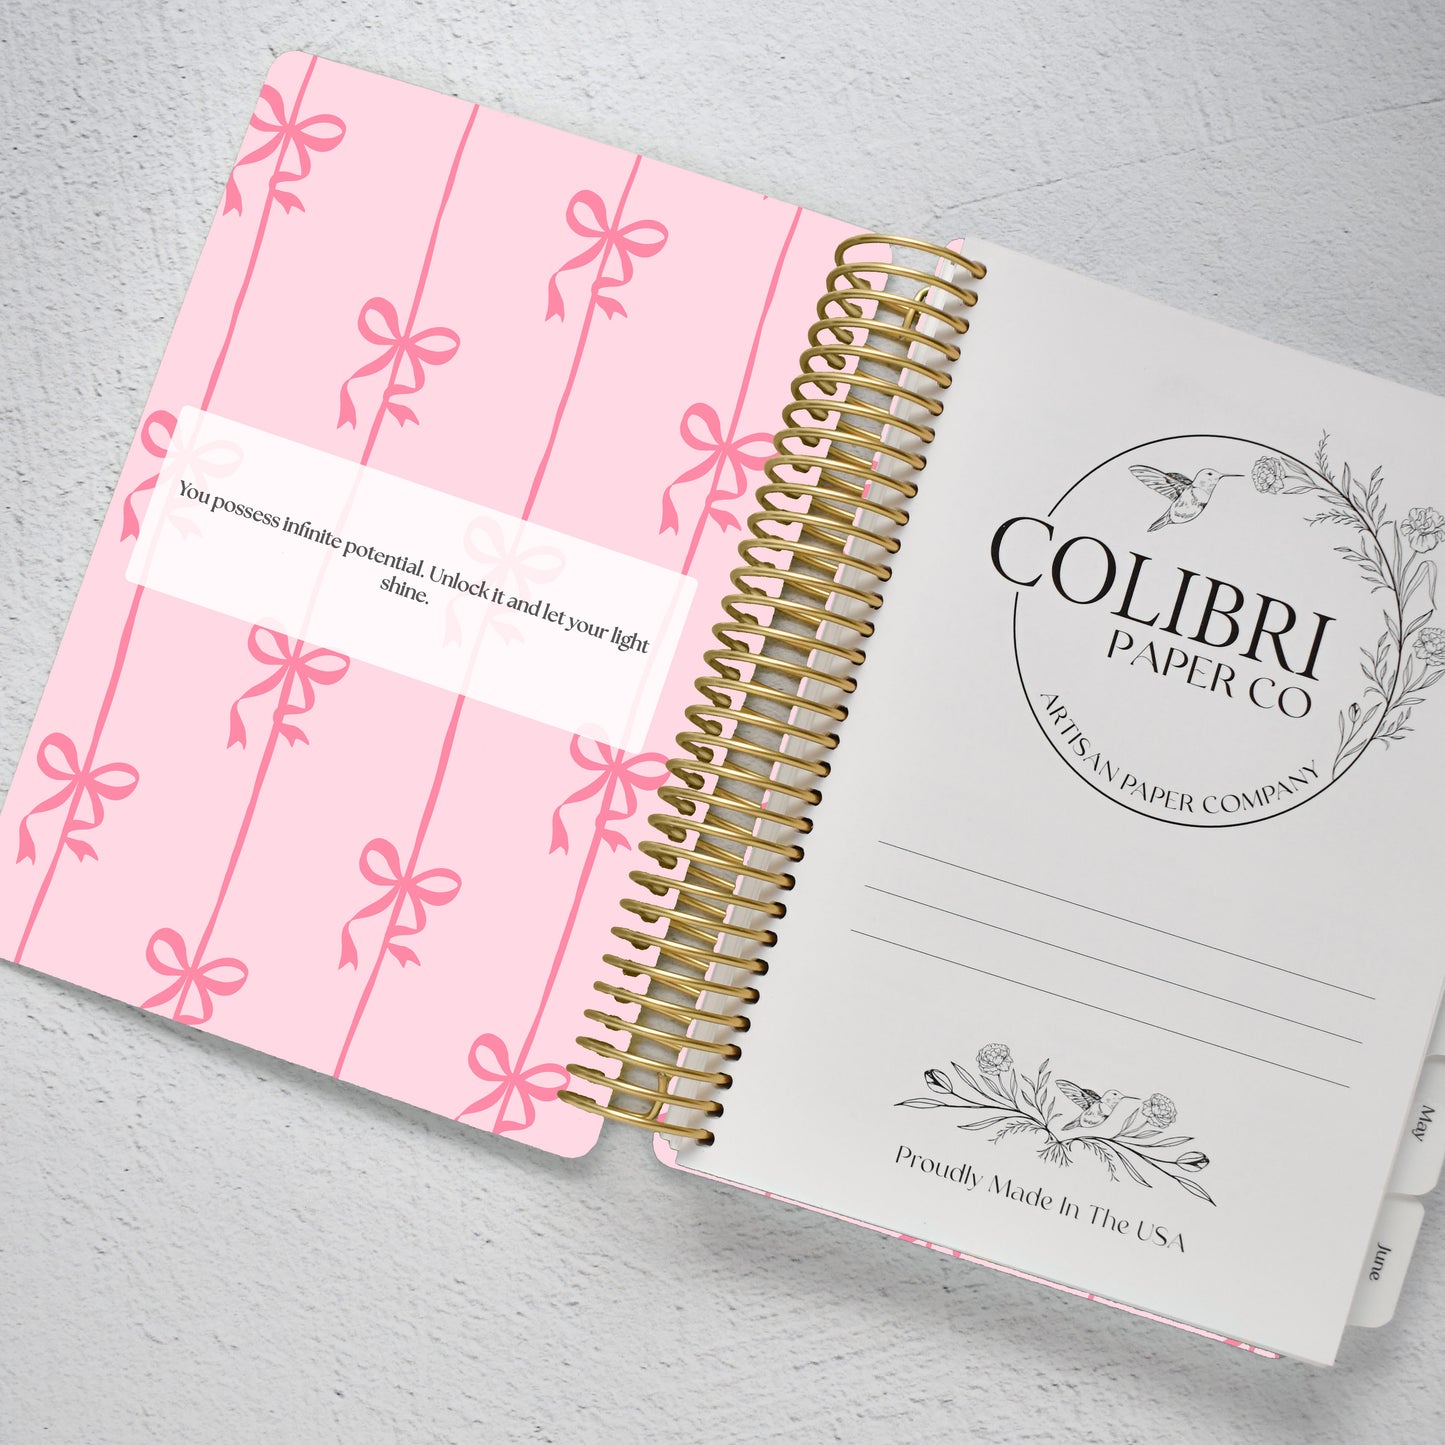 The Works Horizontal Weekly Planner - Coquette